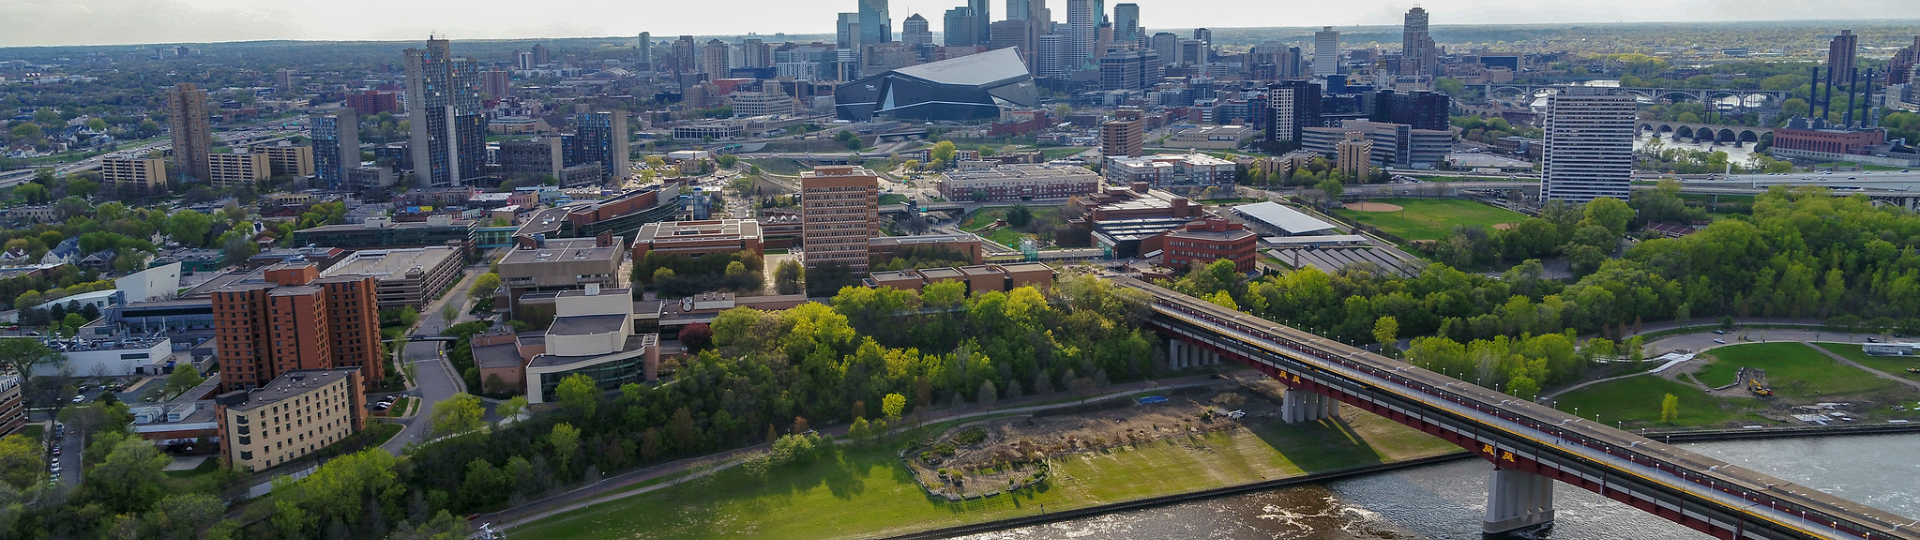 Aerial view of the West Bank of University of Minnesota